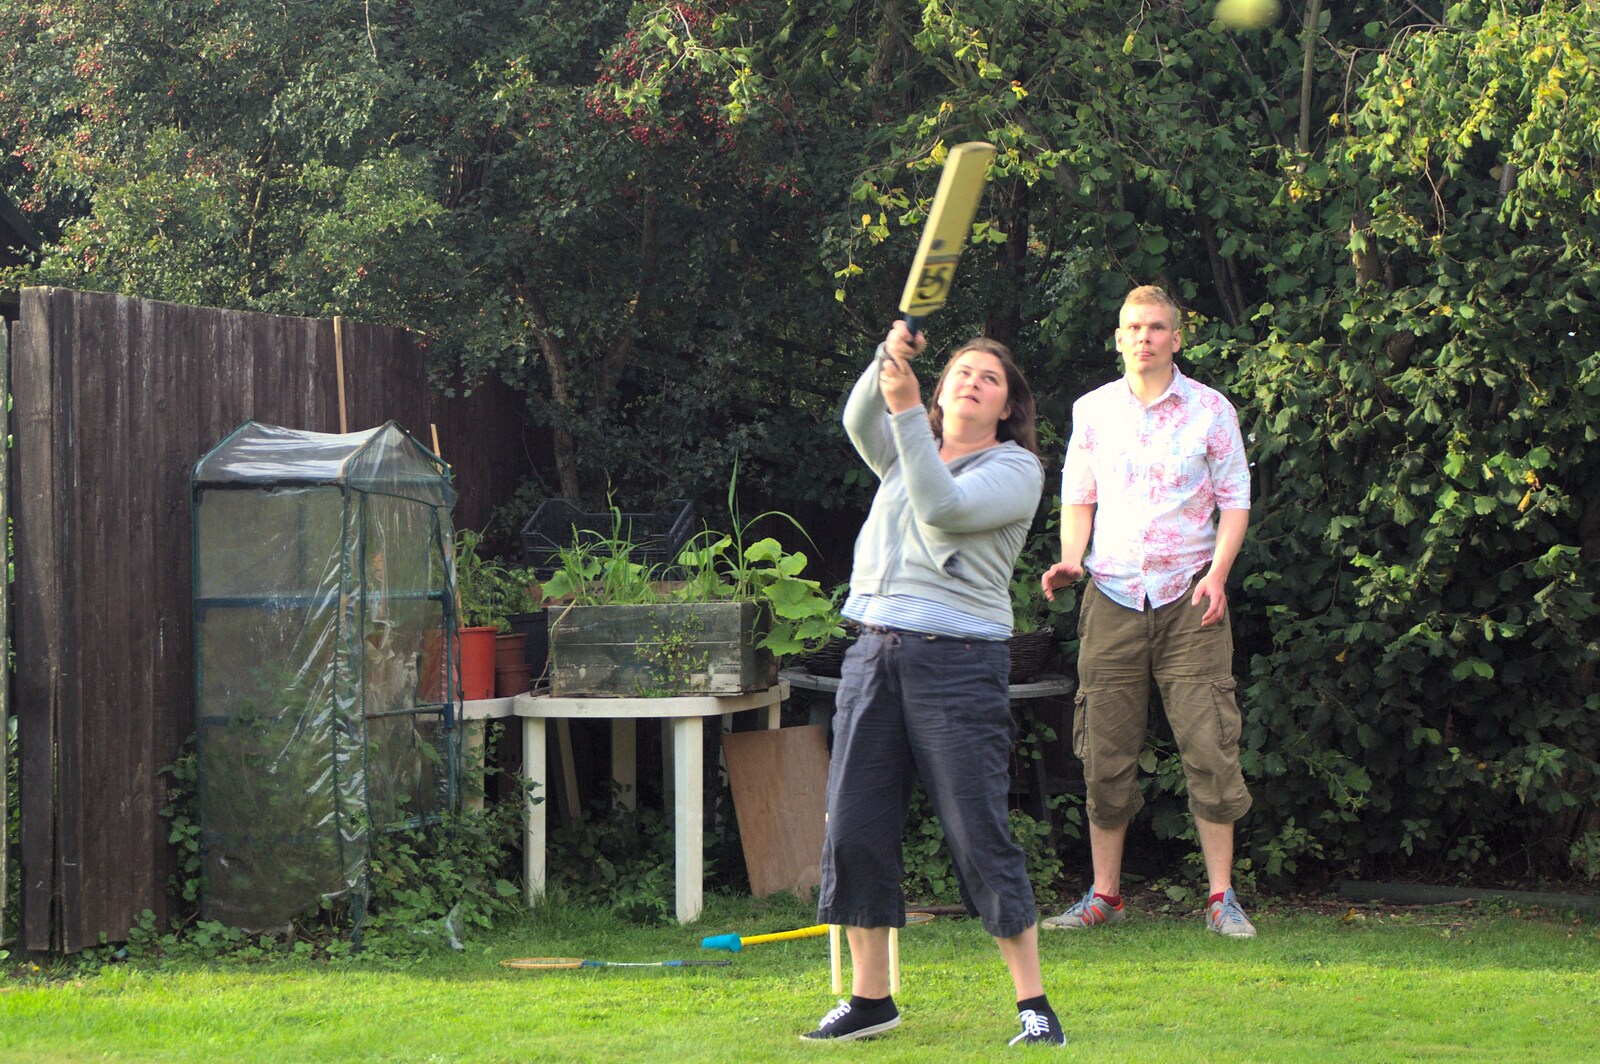 Claire lobs the ball up for a six from Barbeque at the Swan Inn, Brome, Suffolk - 5th August 2011